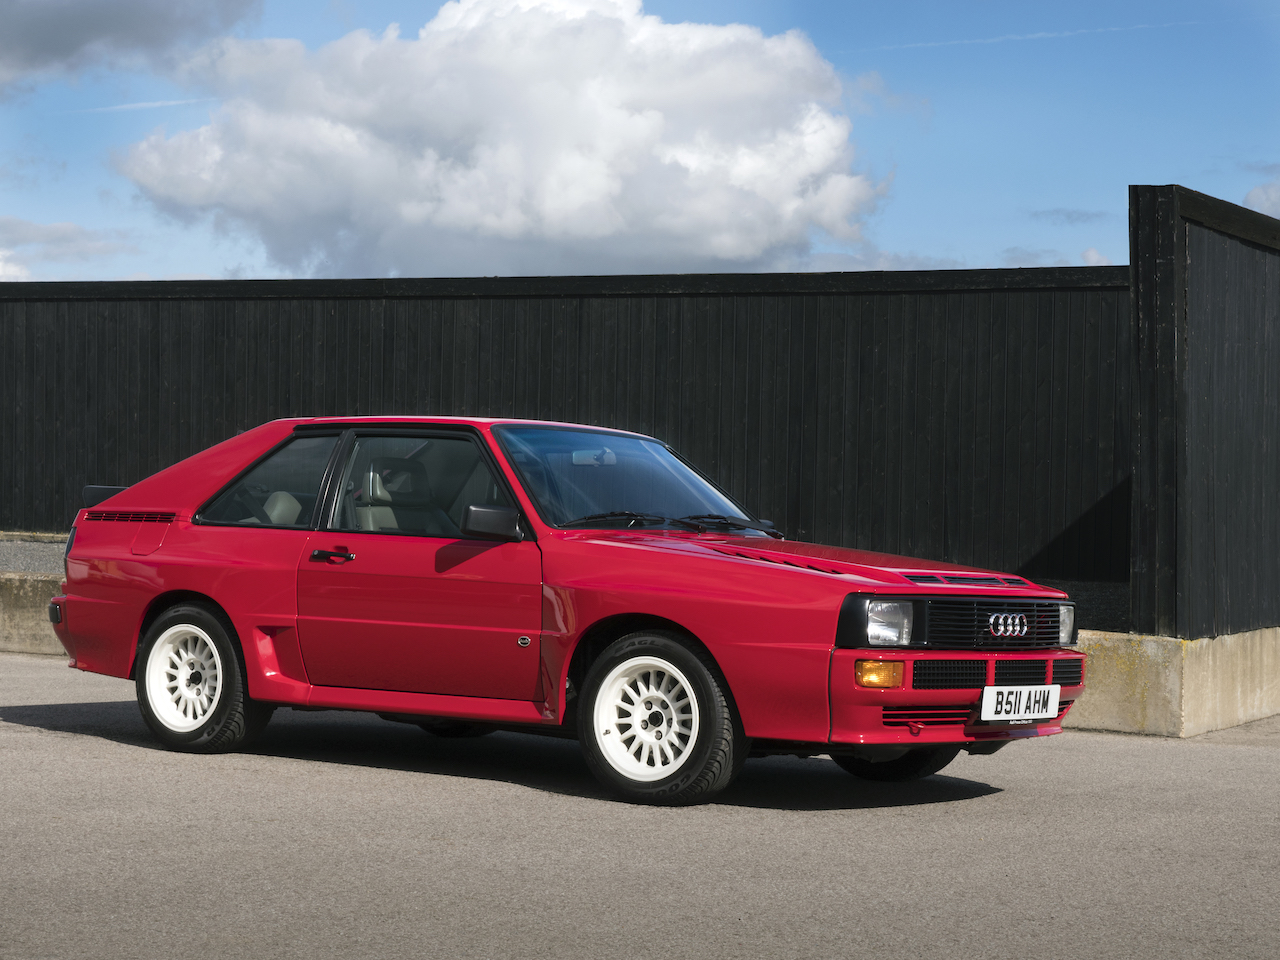 Audi Quattro’s 40th anniversary to be celebrated at The London Classic Car Show